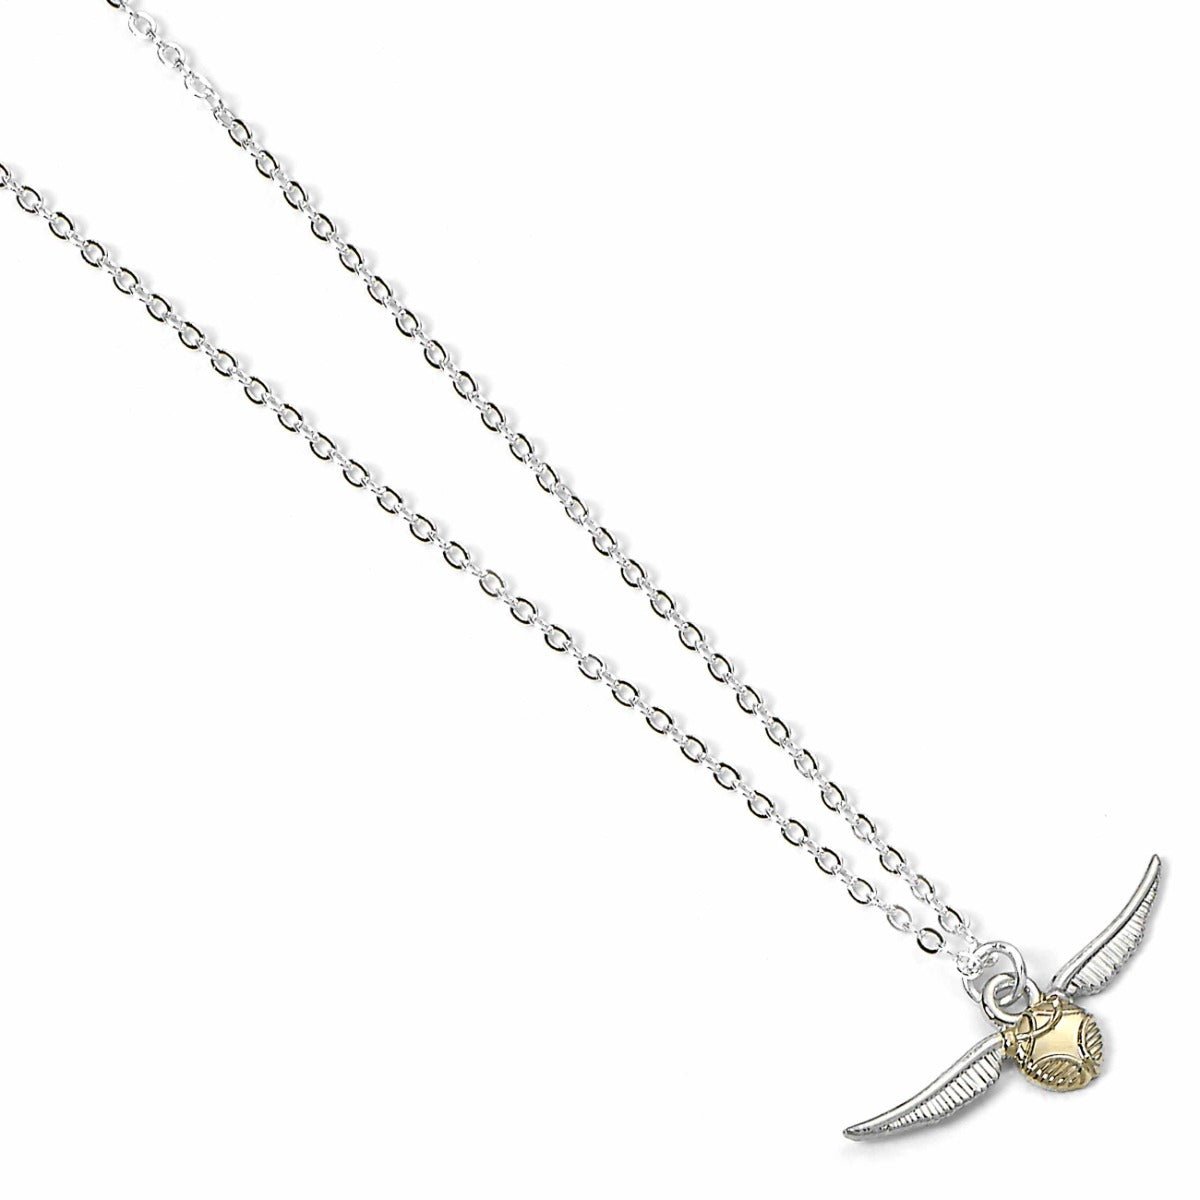 Harry Potter Golden Snitch Necklace - Inspire Newquay